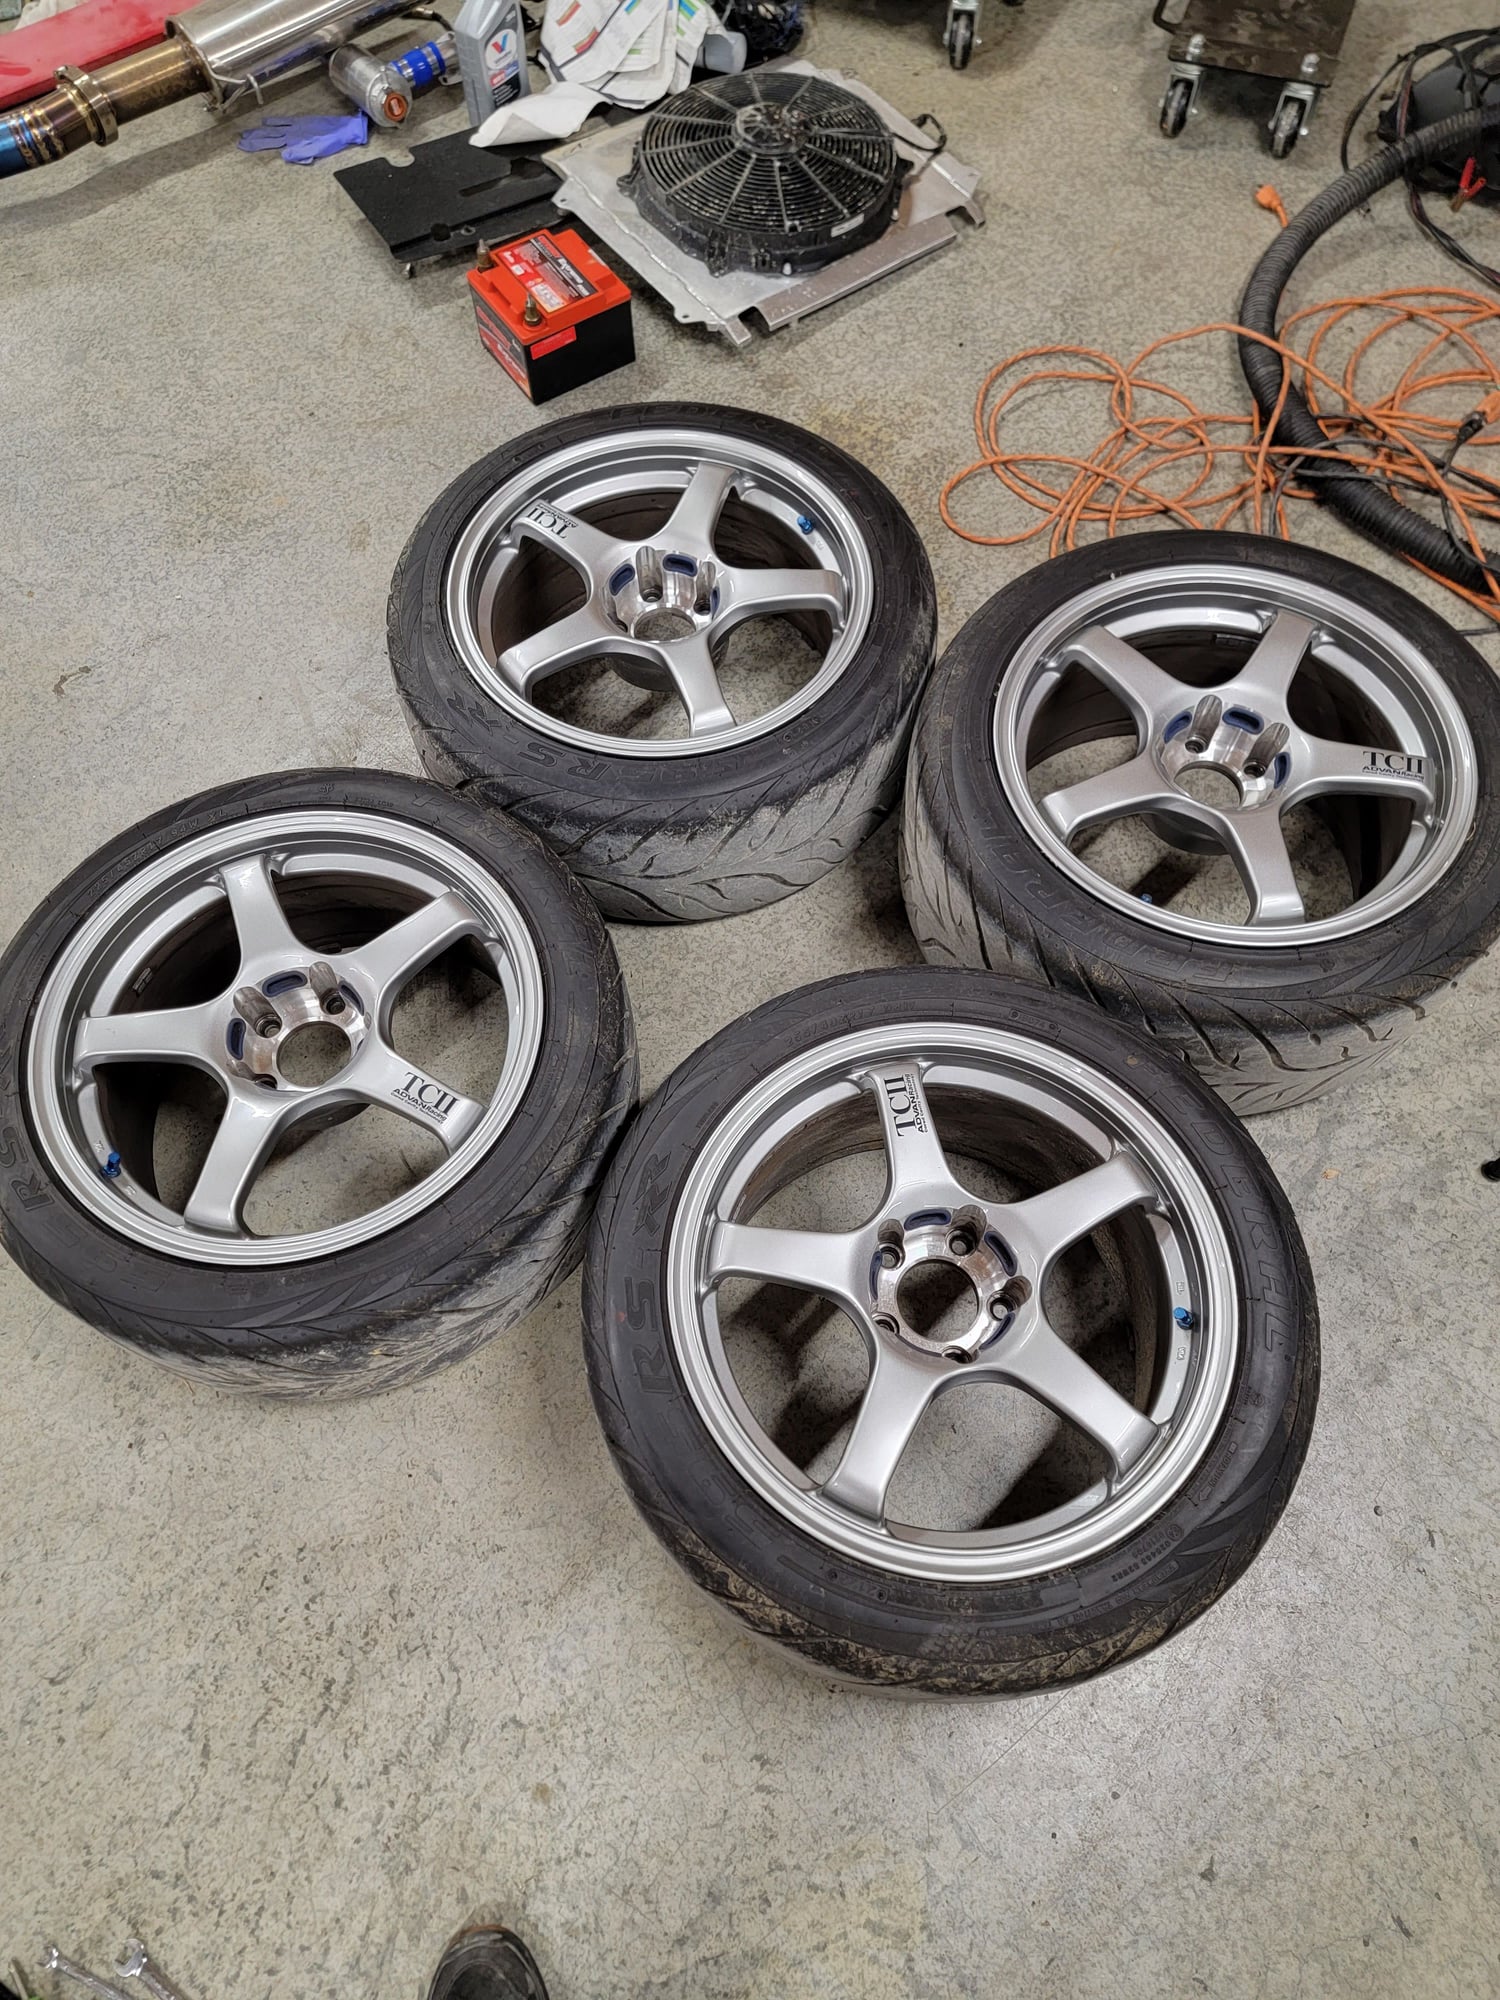 1994 Mazda RX-7 - Advan TC-2 Hollow Spokes - Wheels and Tires/Axles - $2,500 - West Harrison, IN 47060, United States